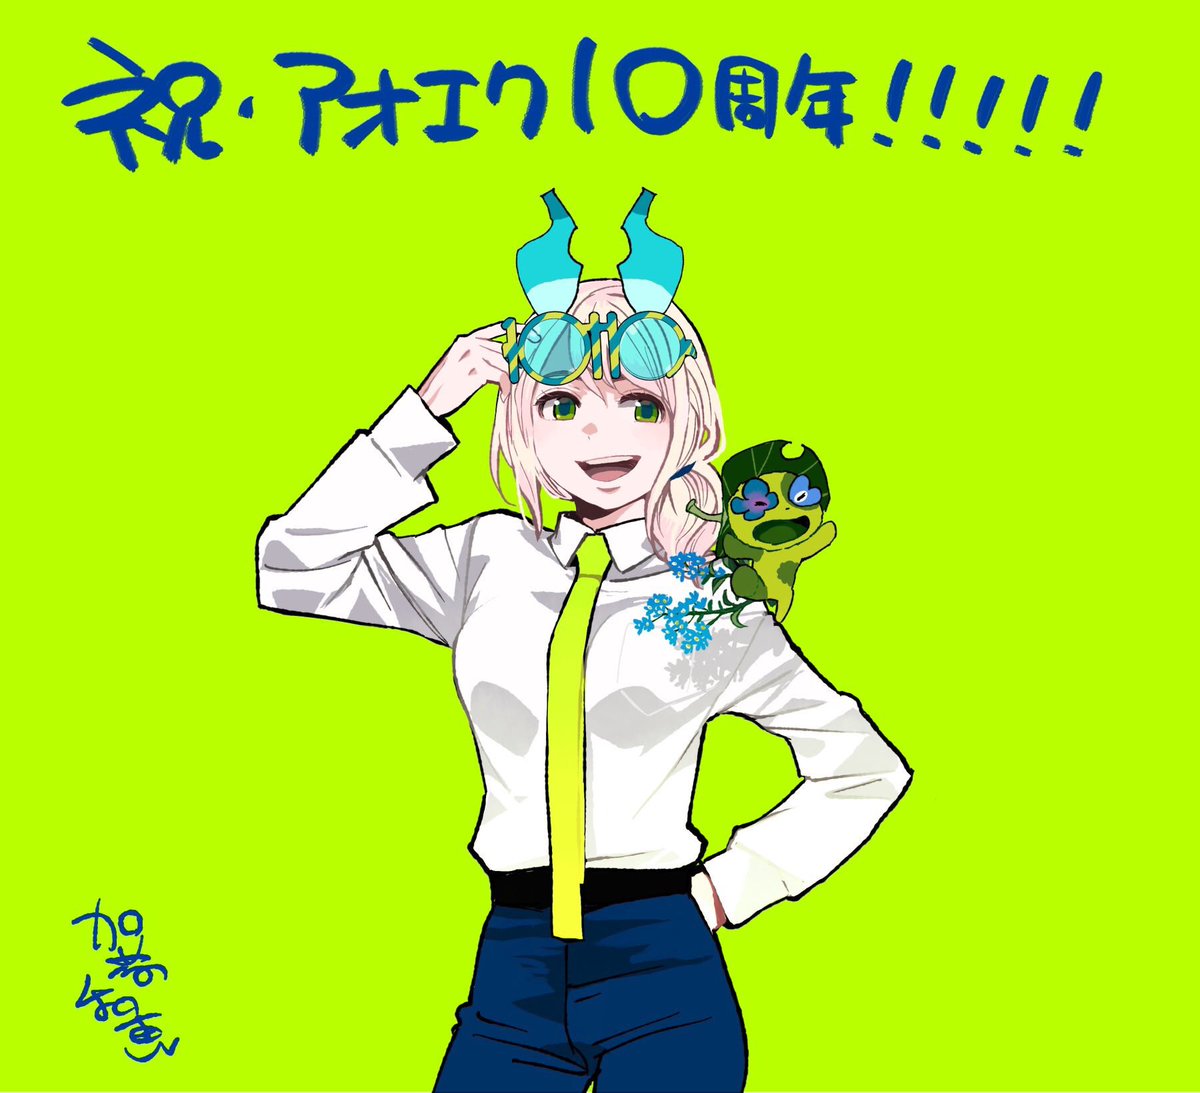 Day 4 Pants Shiemi... a concept...EXCEPT IT ISNT JUST A CONCEPT, KATO HERSELF MADE IT REAL ON THE 10TH ANNIV AND I SCREAMED